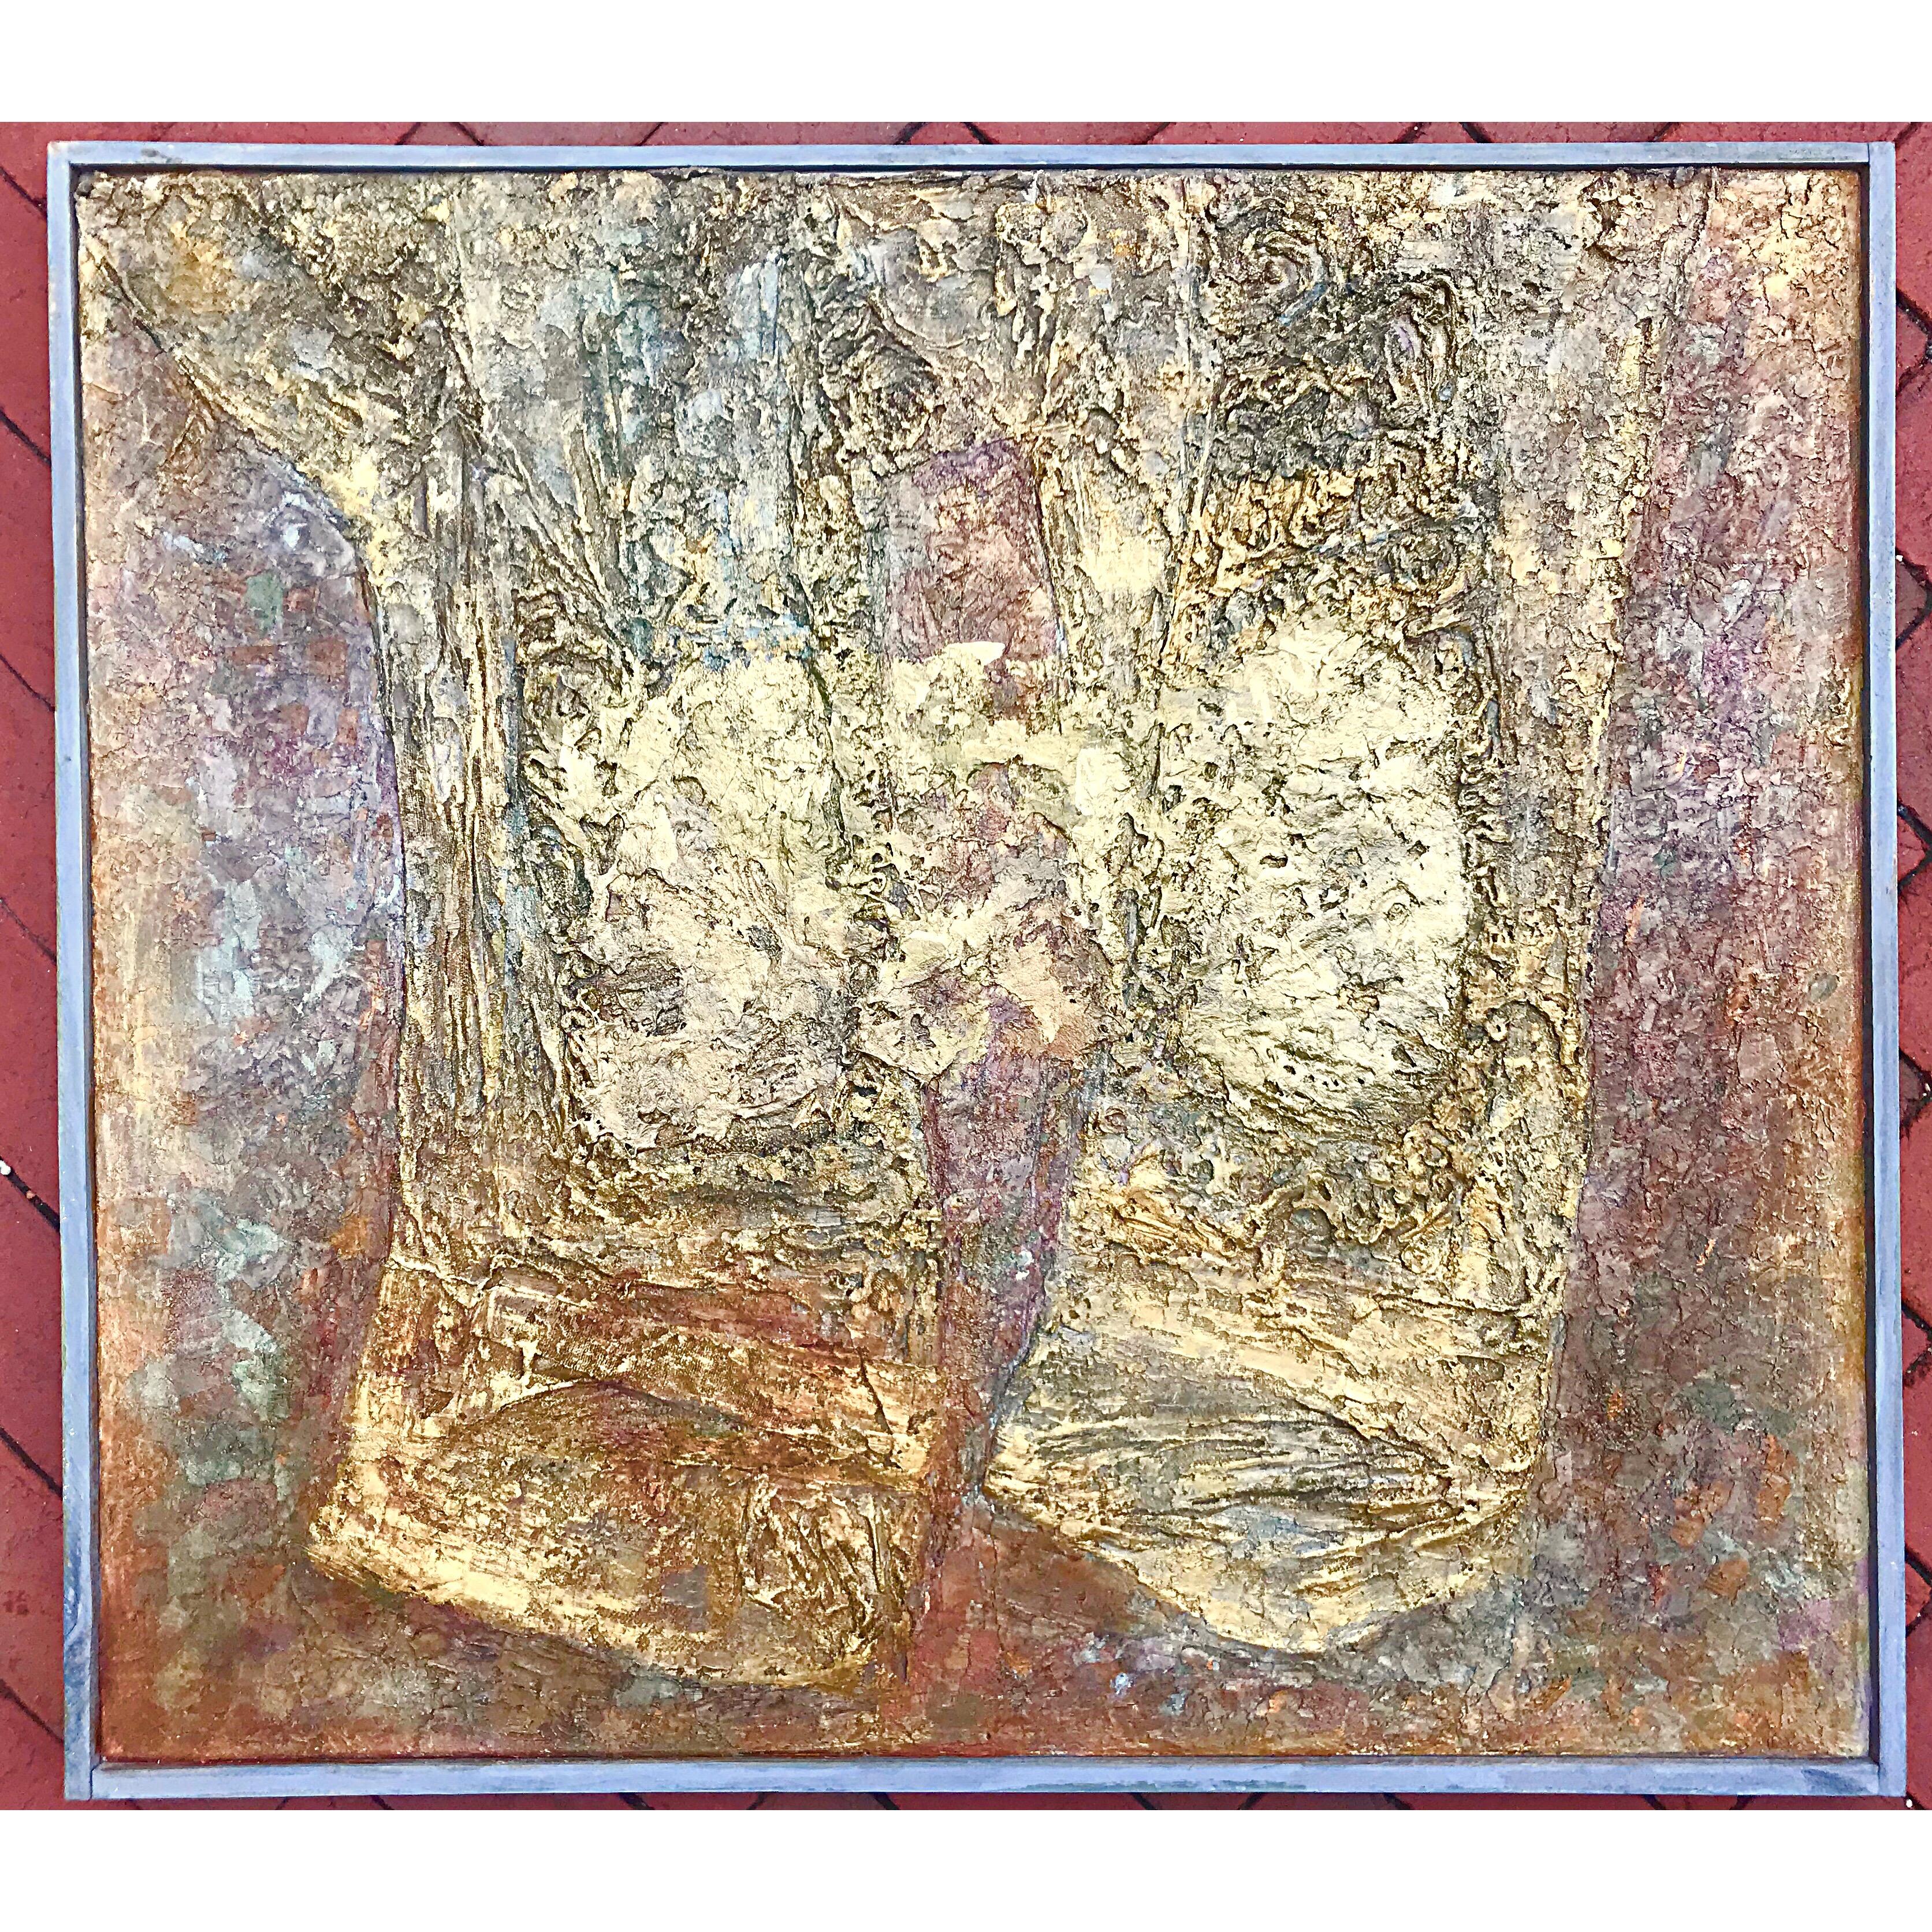 Wonderful abstract modernist painting from France, 1960s. Heavy impasto surface with deep gold and bronze tones.